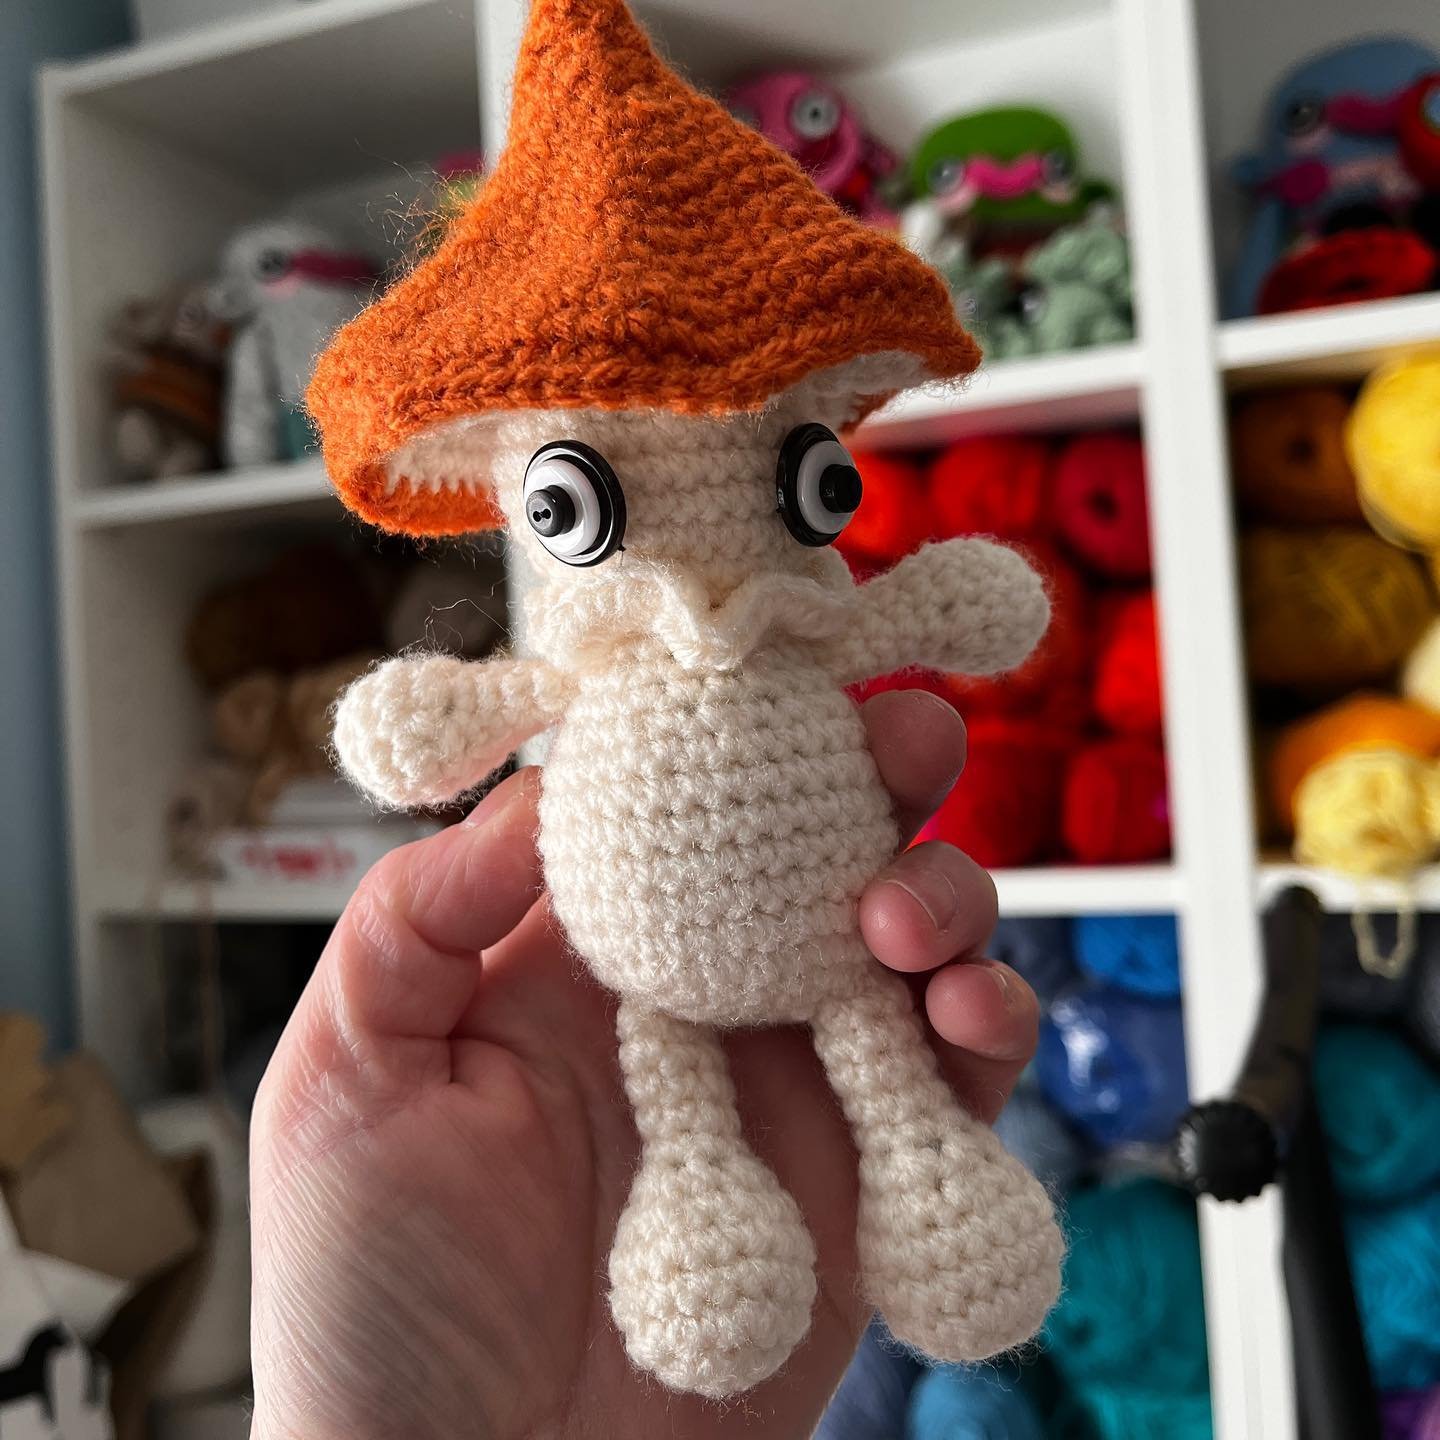 Little Mushroom Sprite! 🍄 @forestfolk.crochet was kind enough recently to send me a copy of her new amigurumi pattern book, Folk of the Forest 🌳 There are 12 super cute, beginner friendly patterns in the book - this little Mushroom Sprite character